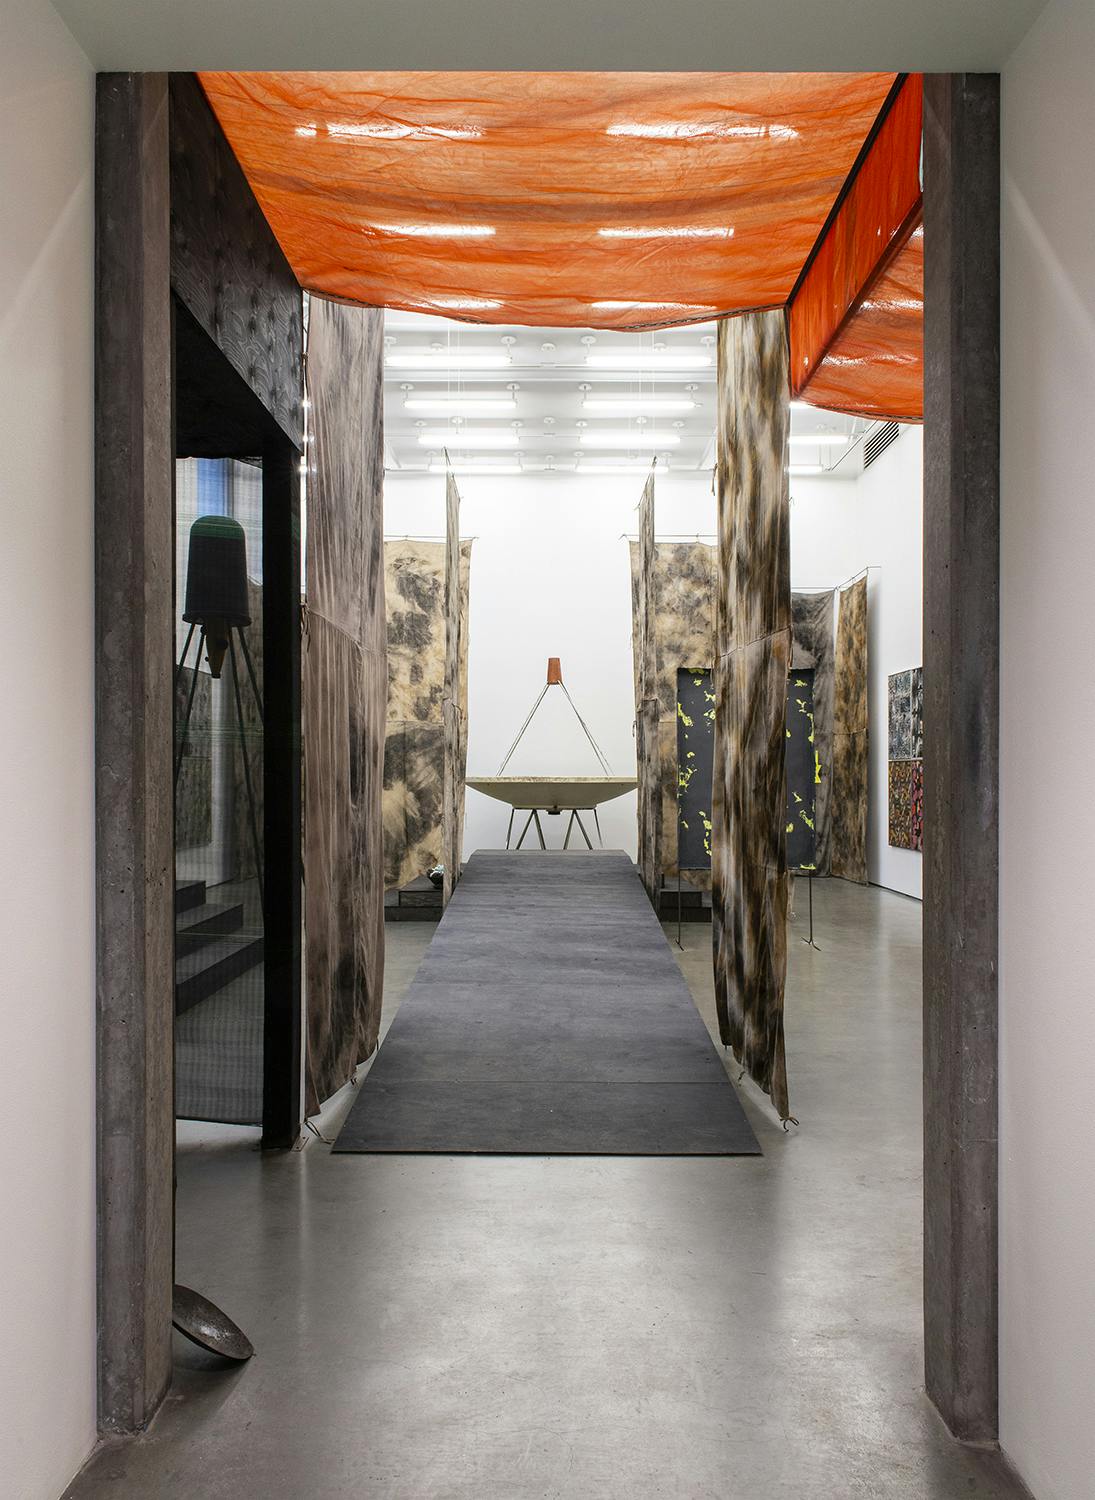 A view of Corbin Union’s exhibition in a gallery space. Long strips of brown and black tie dyed cloth hang throughout the gallery space. A ramp sits in the center of the room and leads to a sculpture.